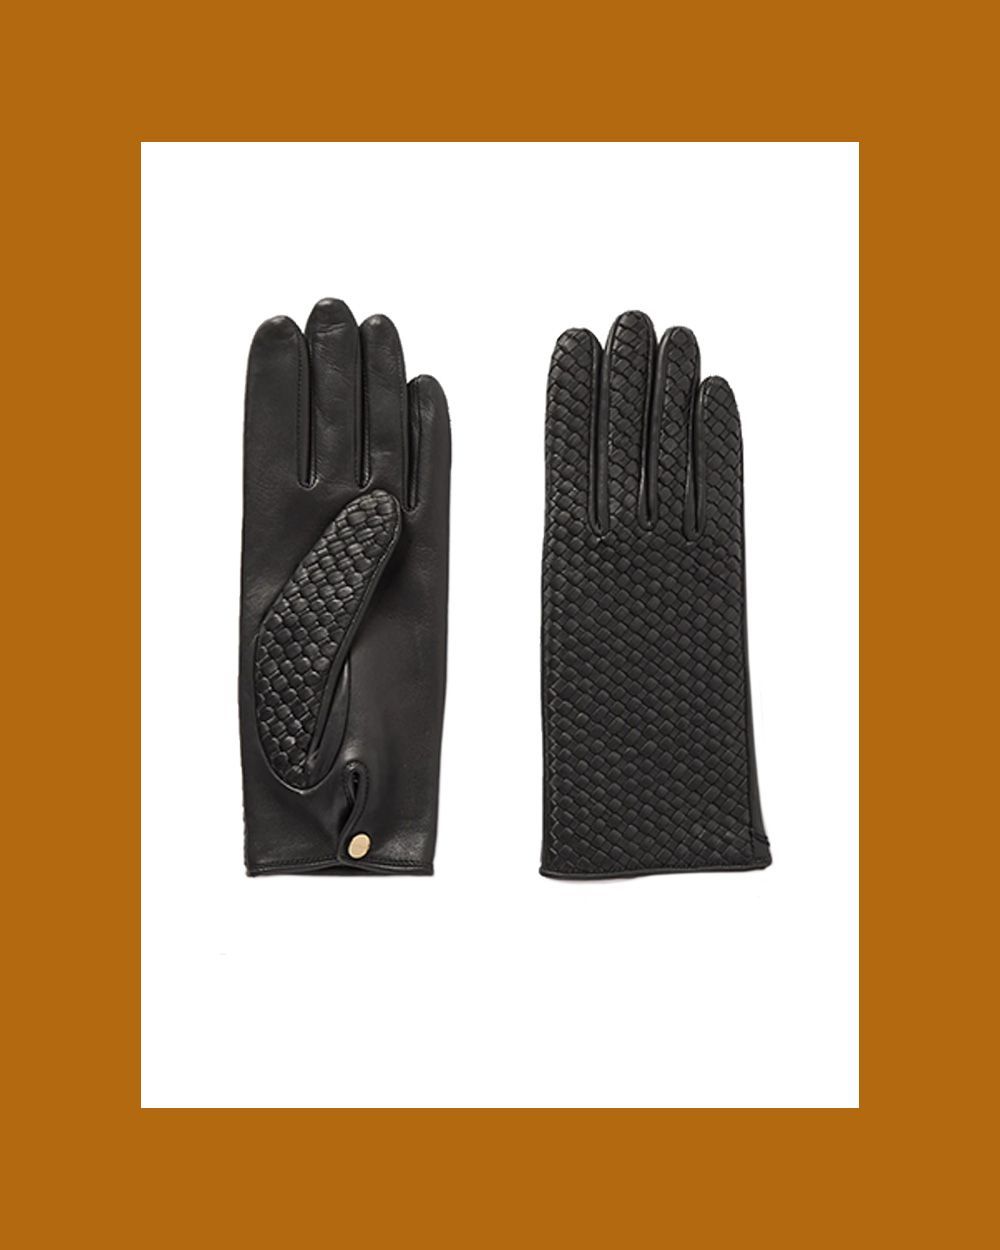 Chloe Woven Leather Gloves